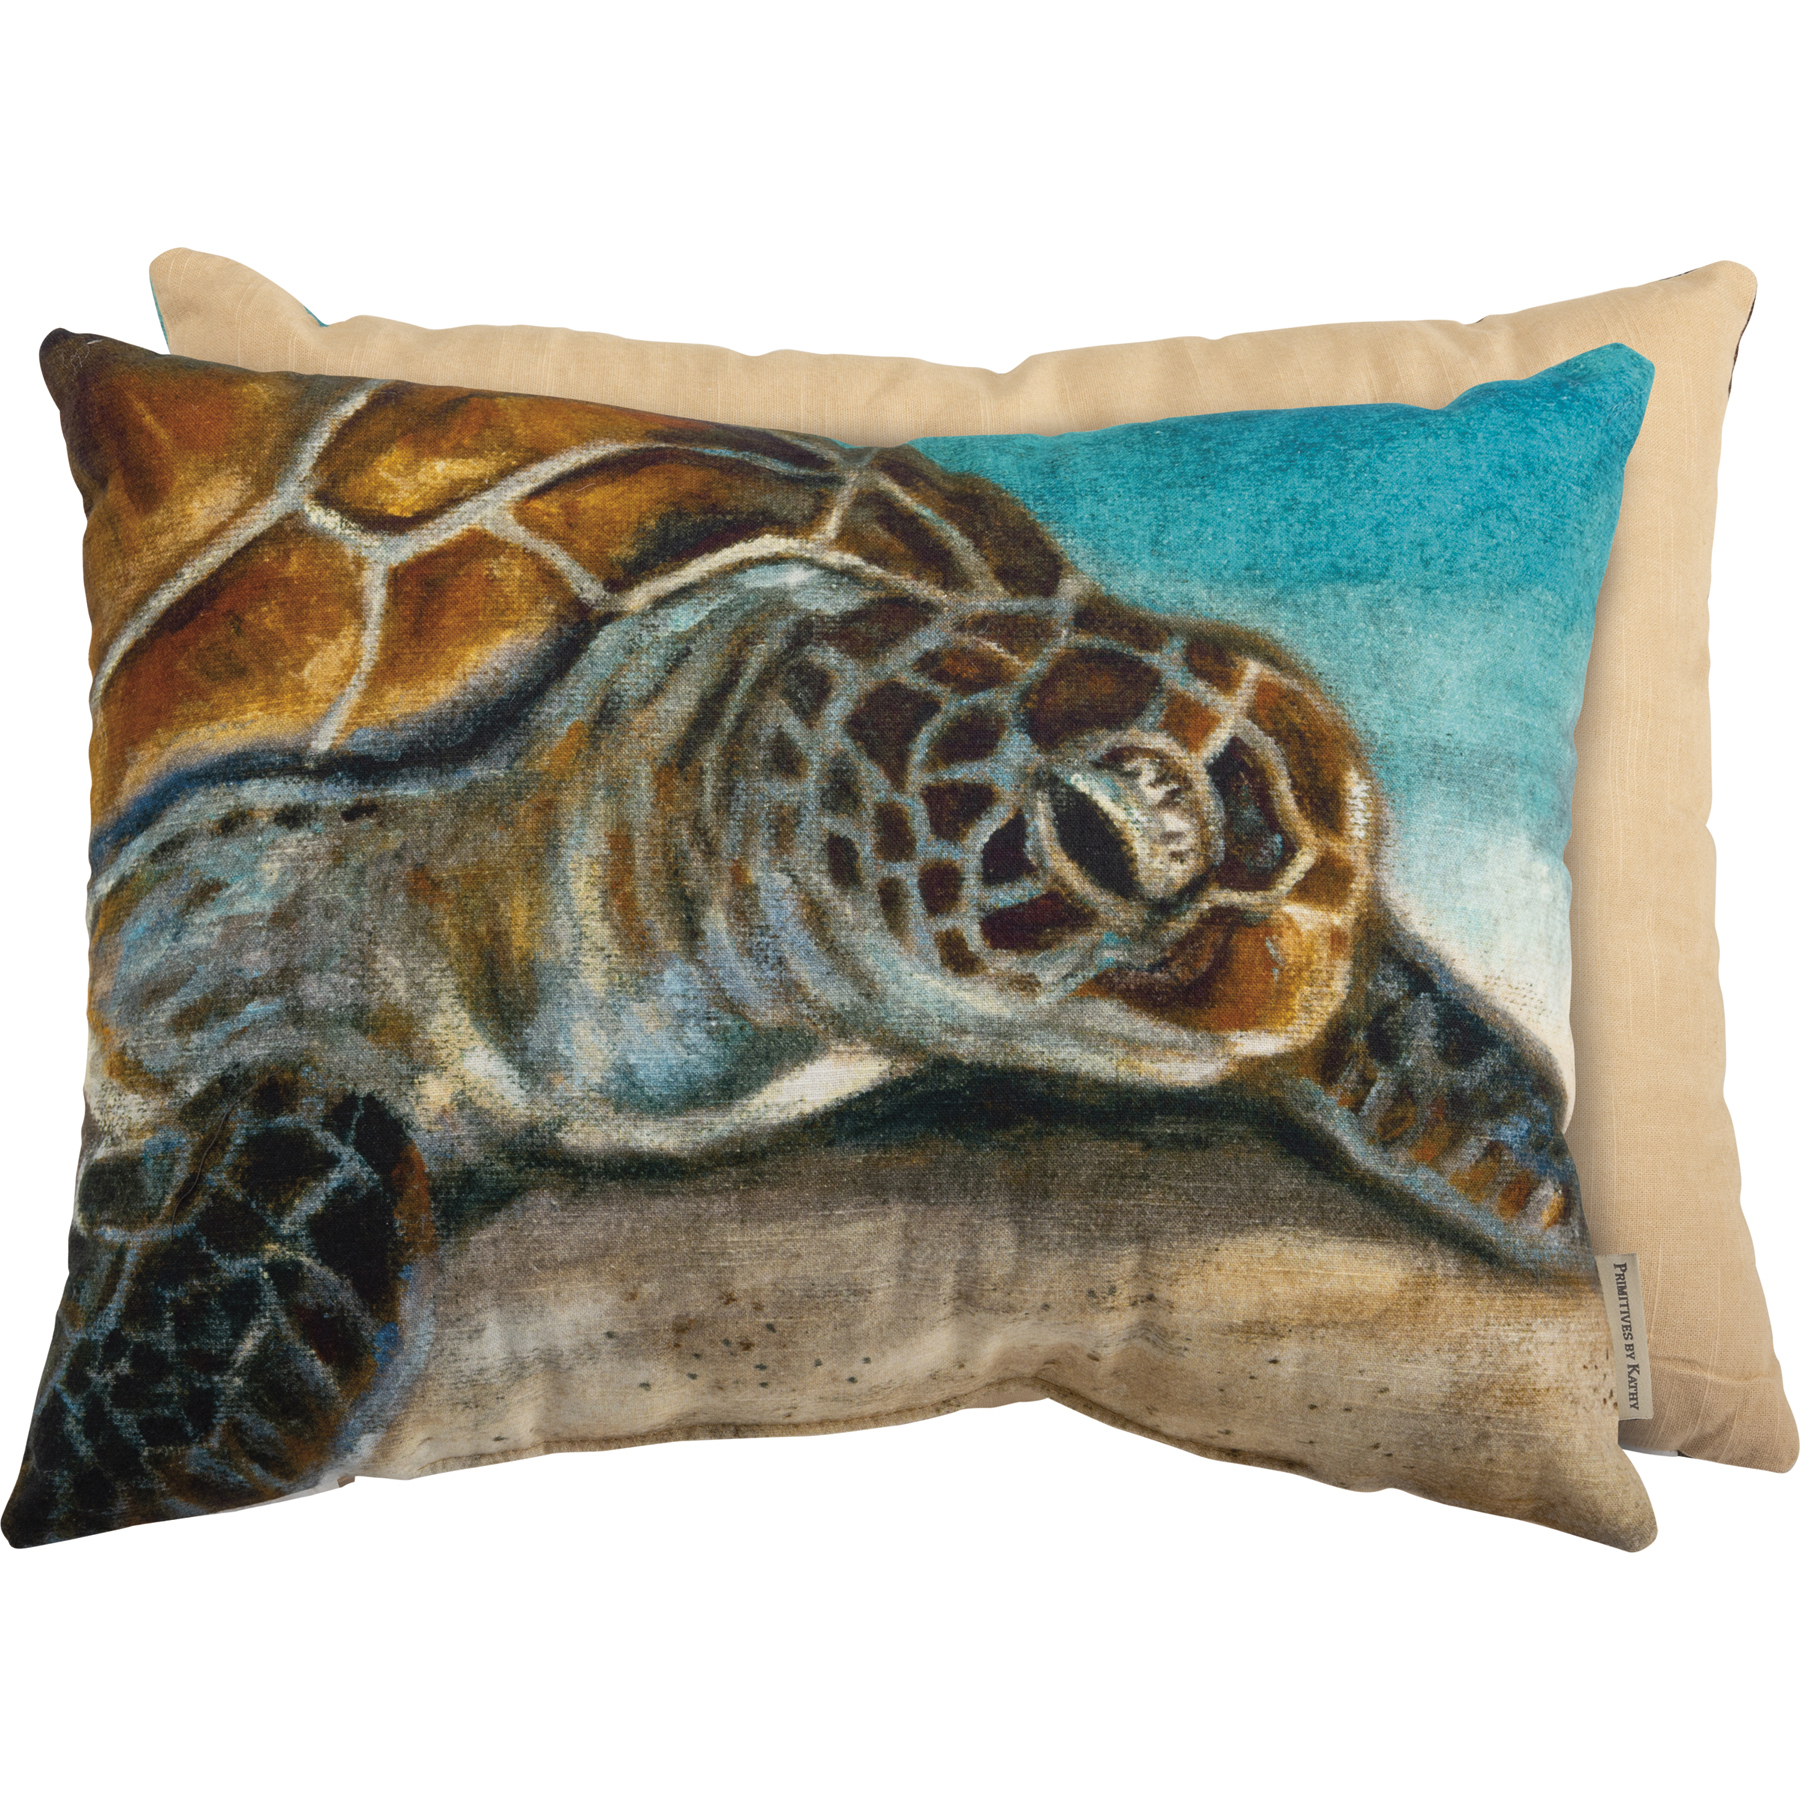 turtle pillow for travel